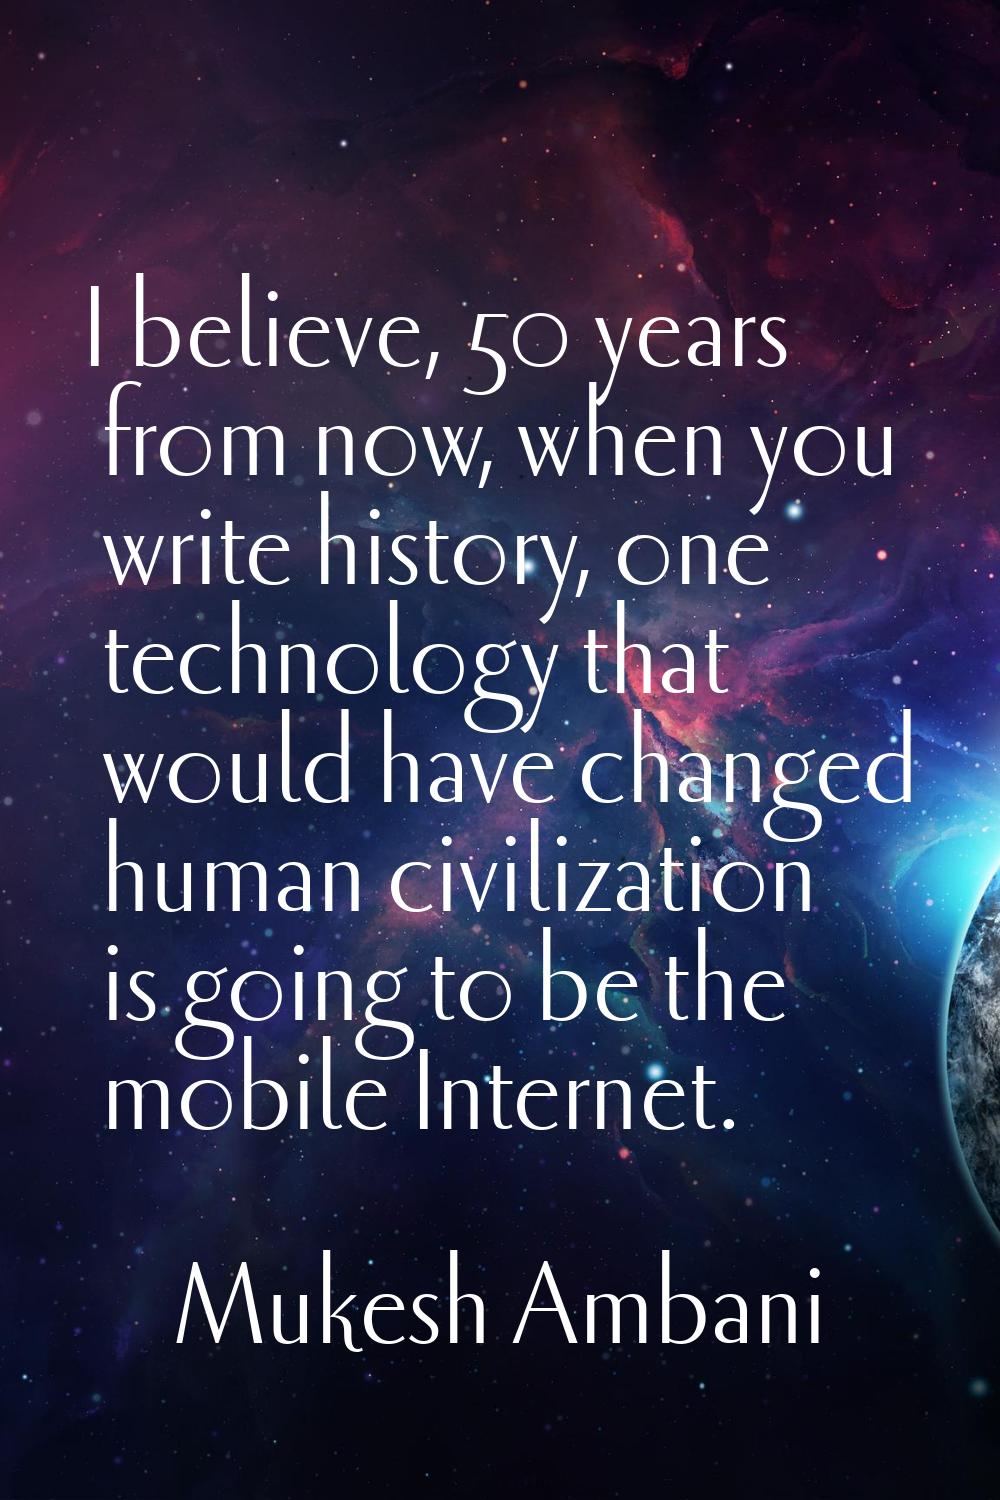 I believe, 50 years from now, when you write history, one technology that would have changed human 